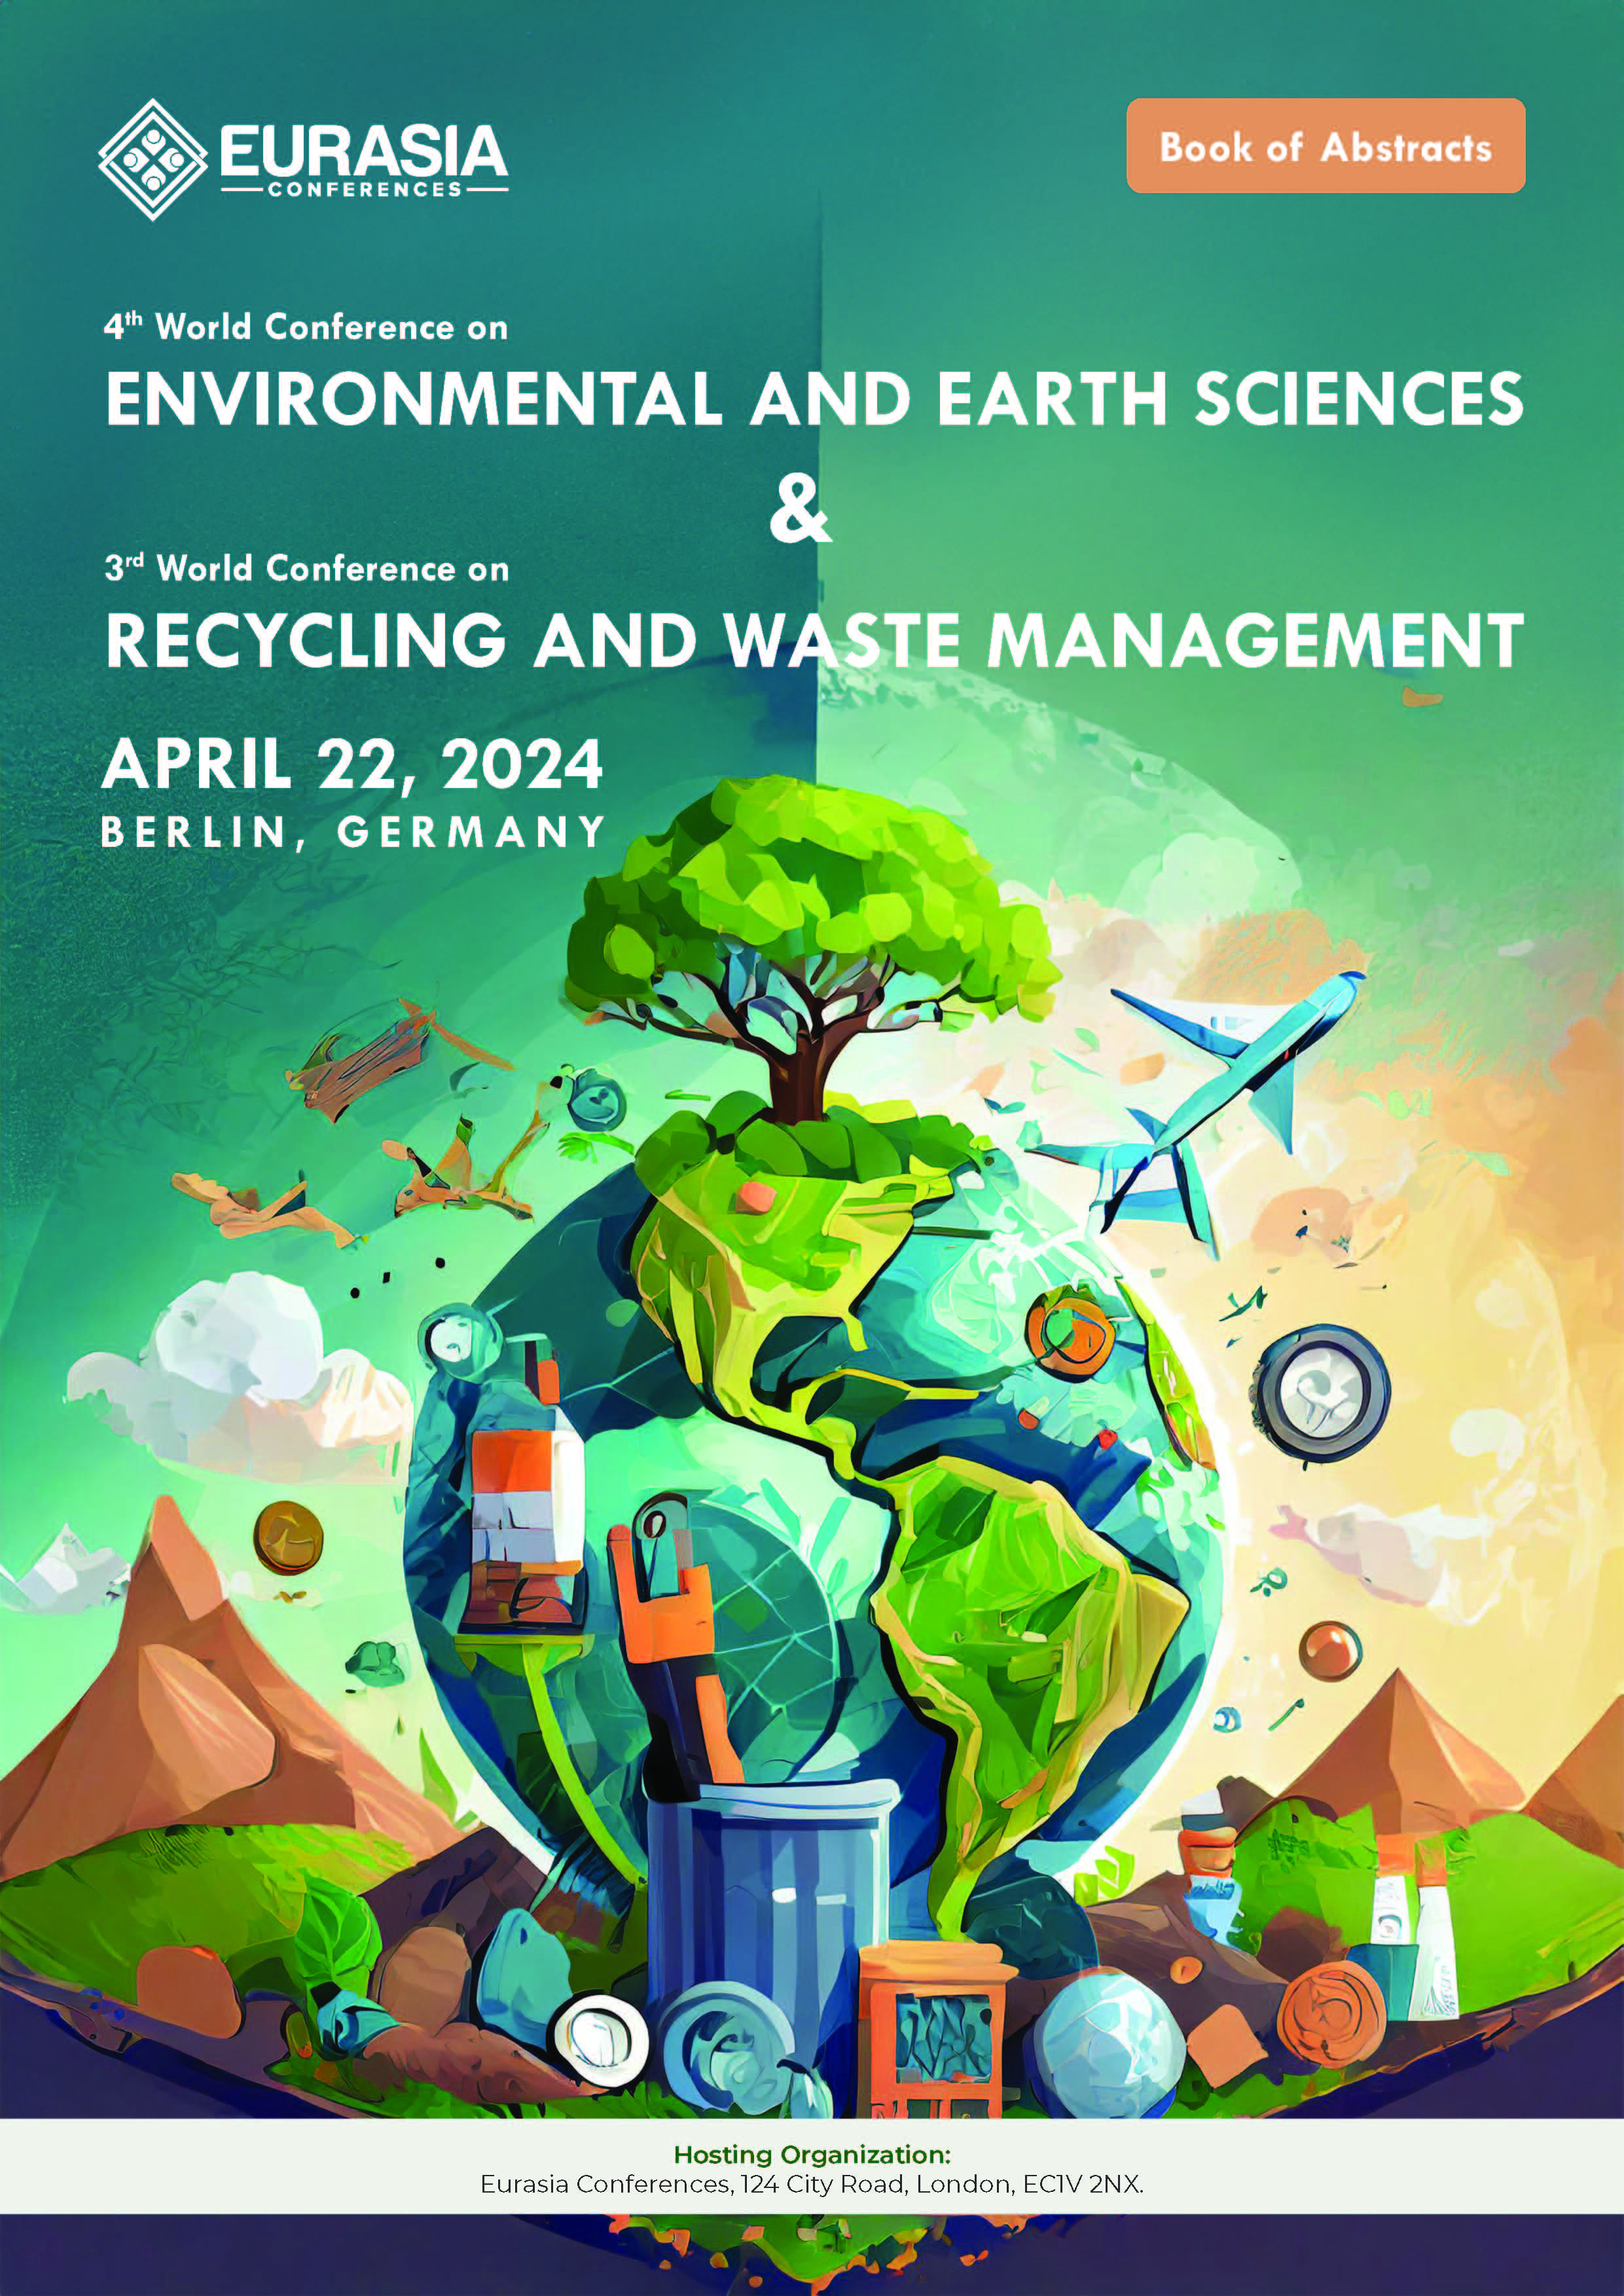 Abstracts of the 4th World Conference on Environmental and Earth Sciences & 3rd World Conference on Recycling and Waste Management